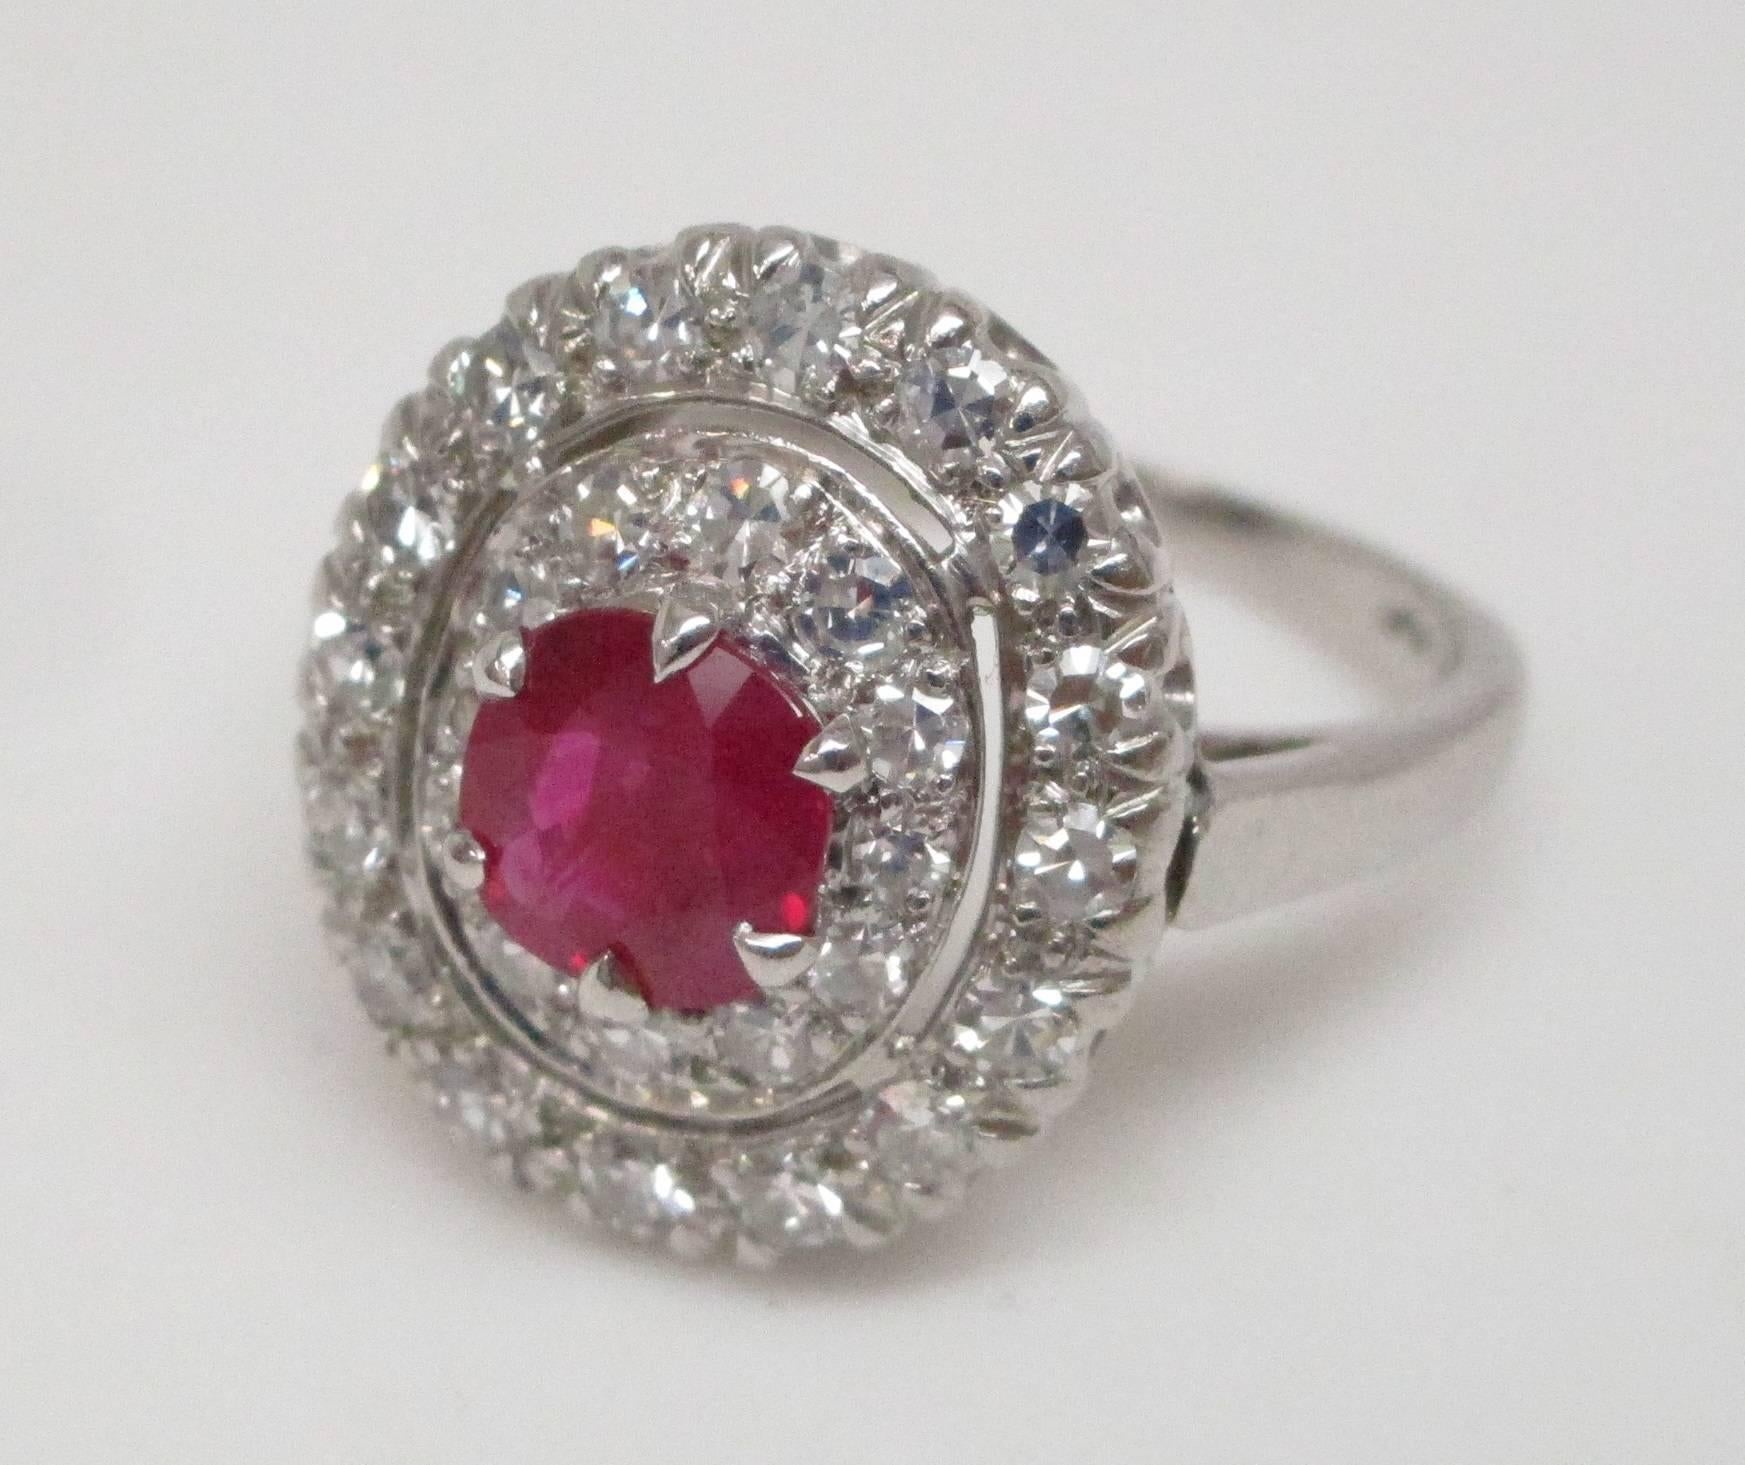 You don't often see a certified Natural Ruby like this. The color is a sumptuous red that screams to be noticed. You'll want to be the first person, or only, on your block to have a rare beauty like this. If you were born in July or just like red,